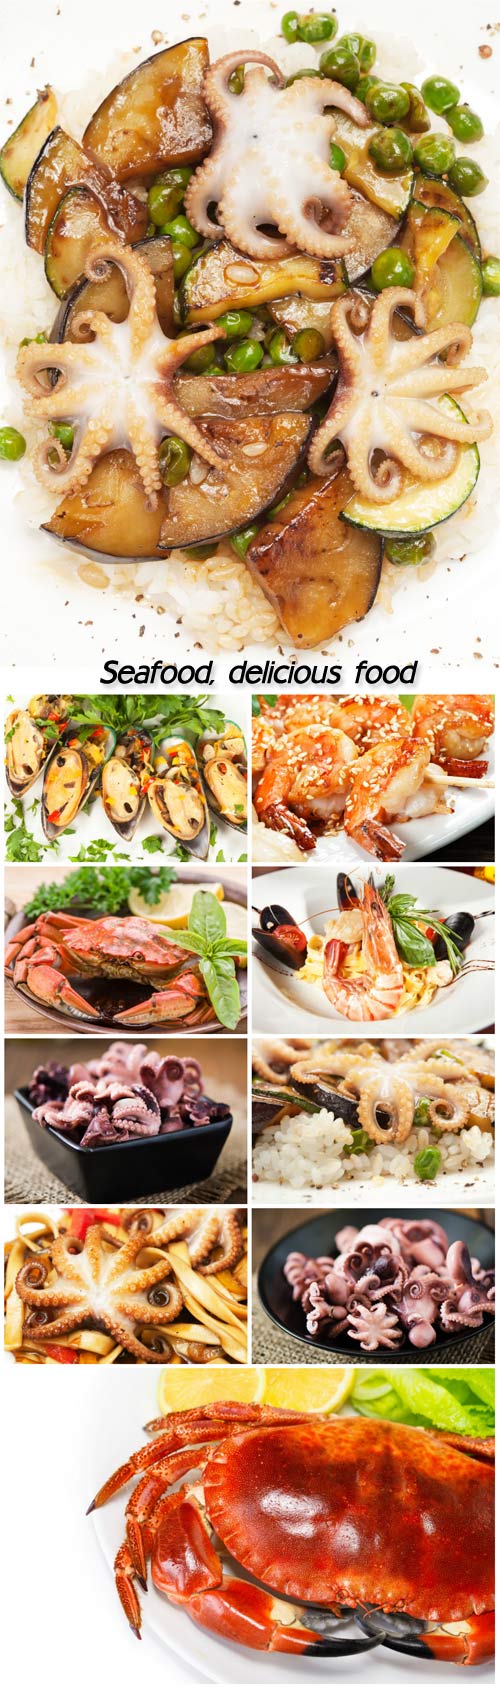 Seafood, delicious food